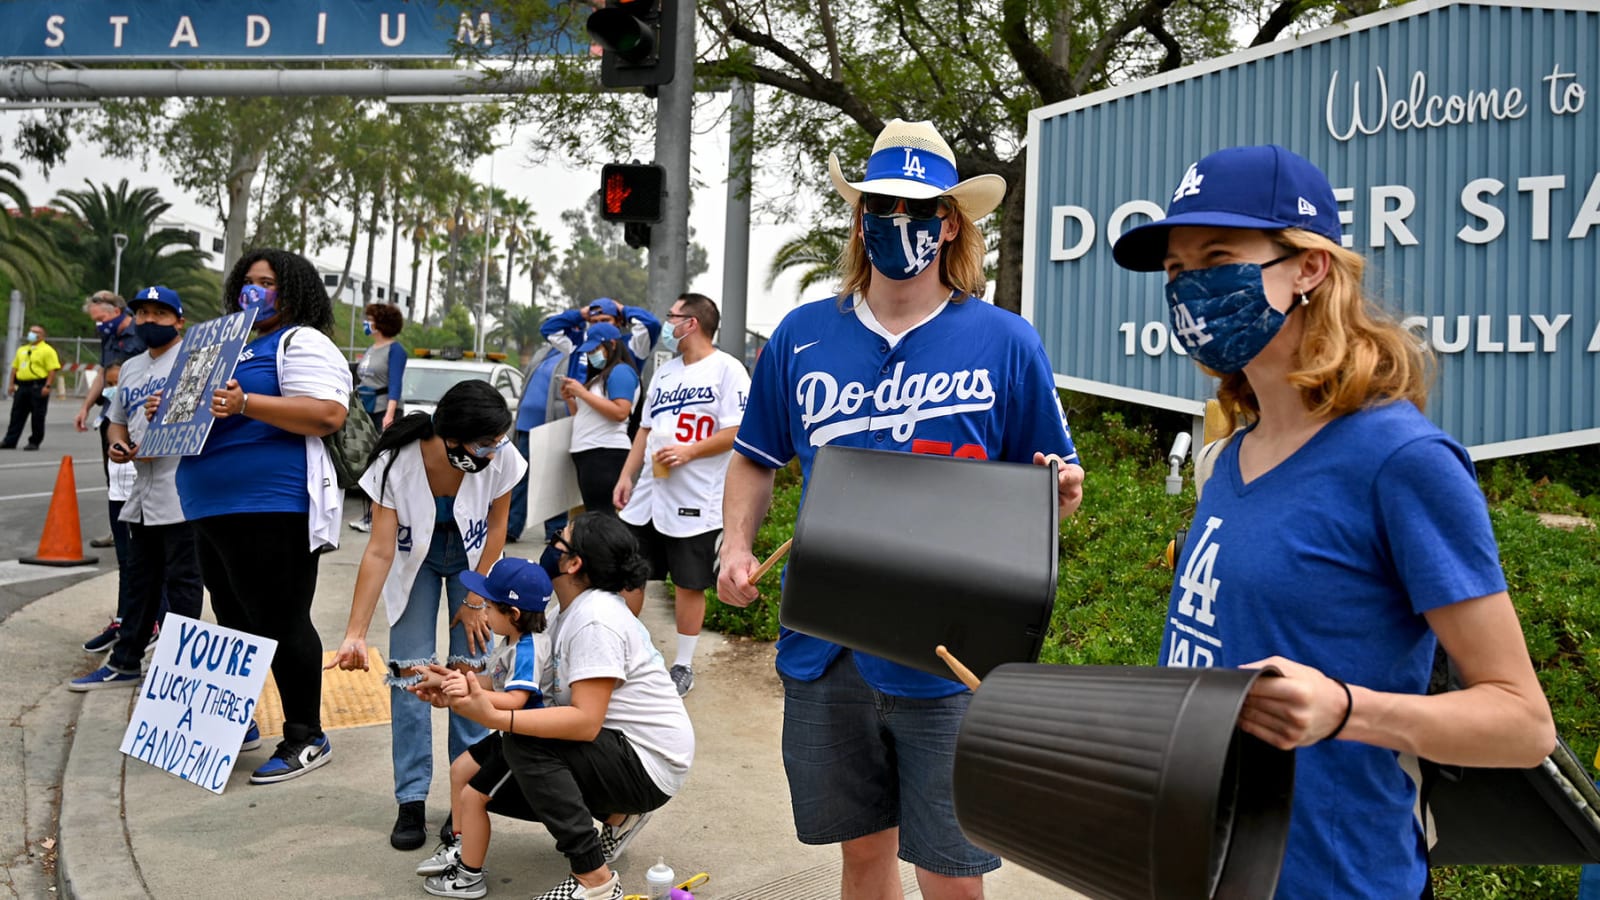 Cheaters!': L.A. fans scoff at Astros at Dodger Stadium